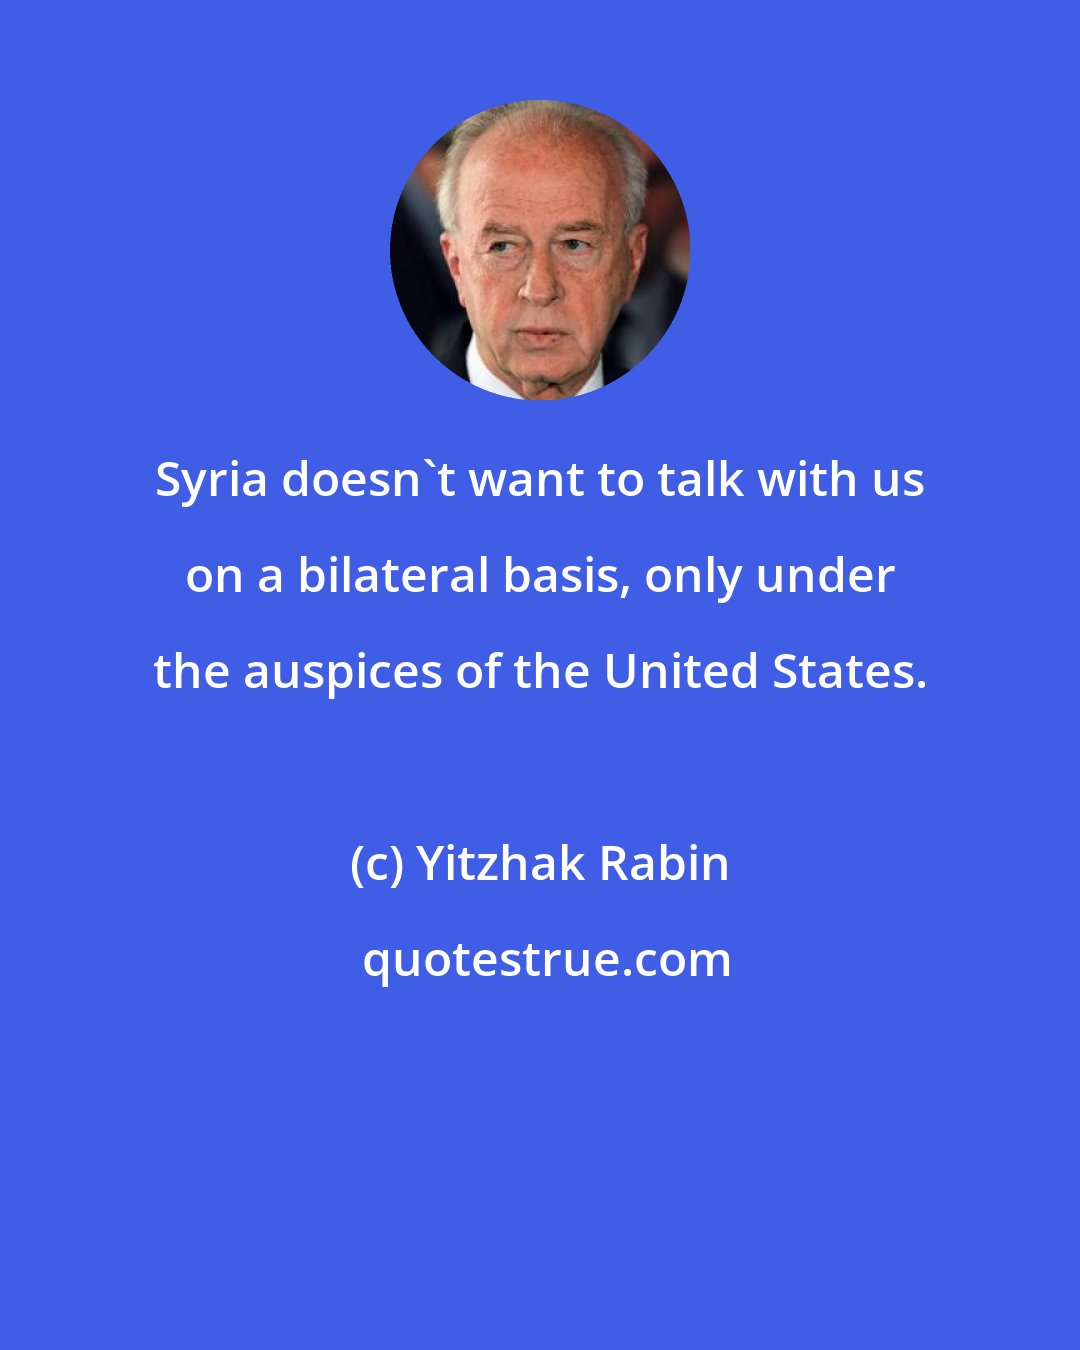 Yitzhak Rabin: Syria doesn't want to talk with us on a bilateral basis, only under the auspices of the United States.